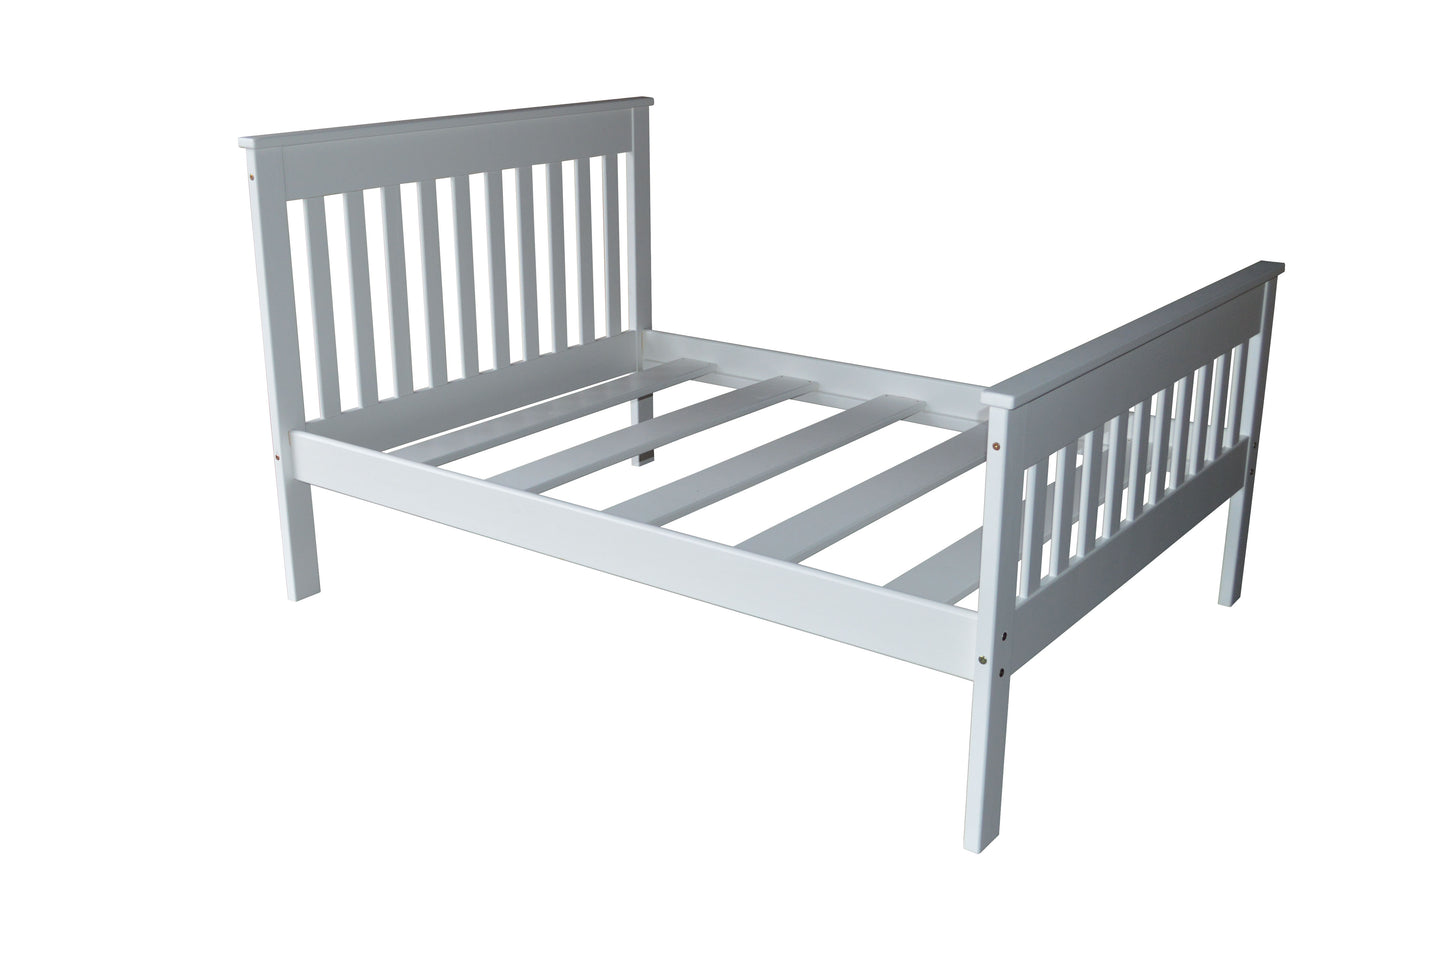 A&L Furniture Versaloft Full Harmony Bed Frame - LEAD TIME TO SHIP 10 BUSINESS DAY